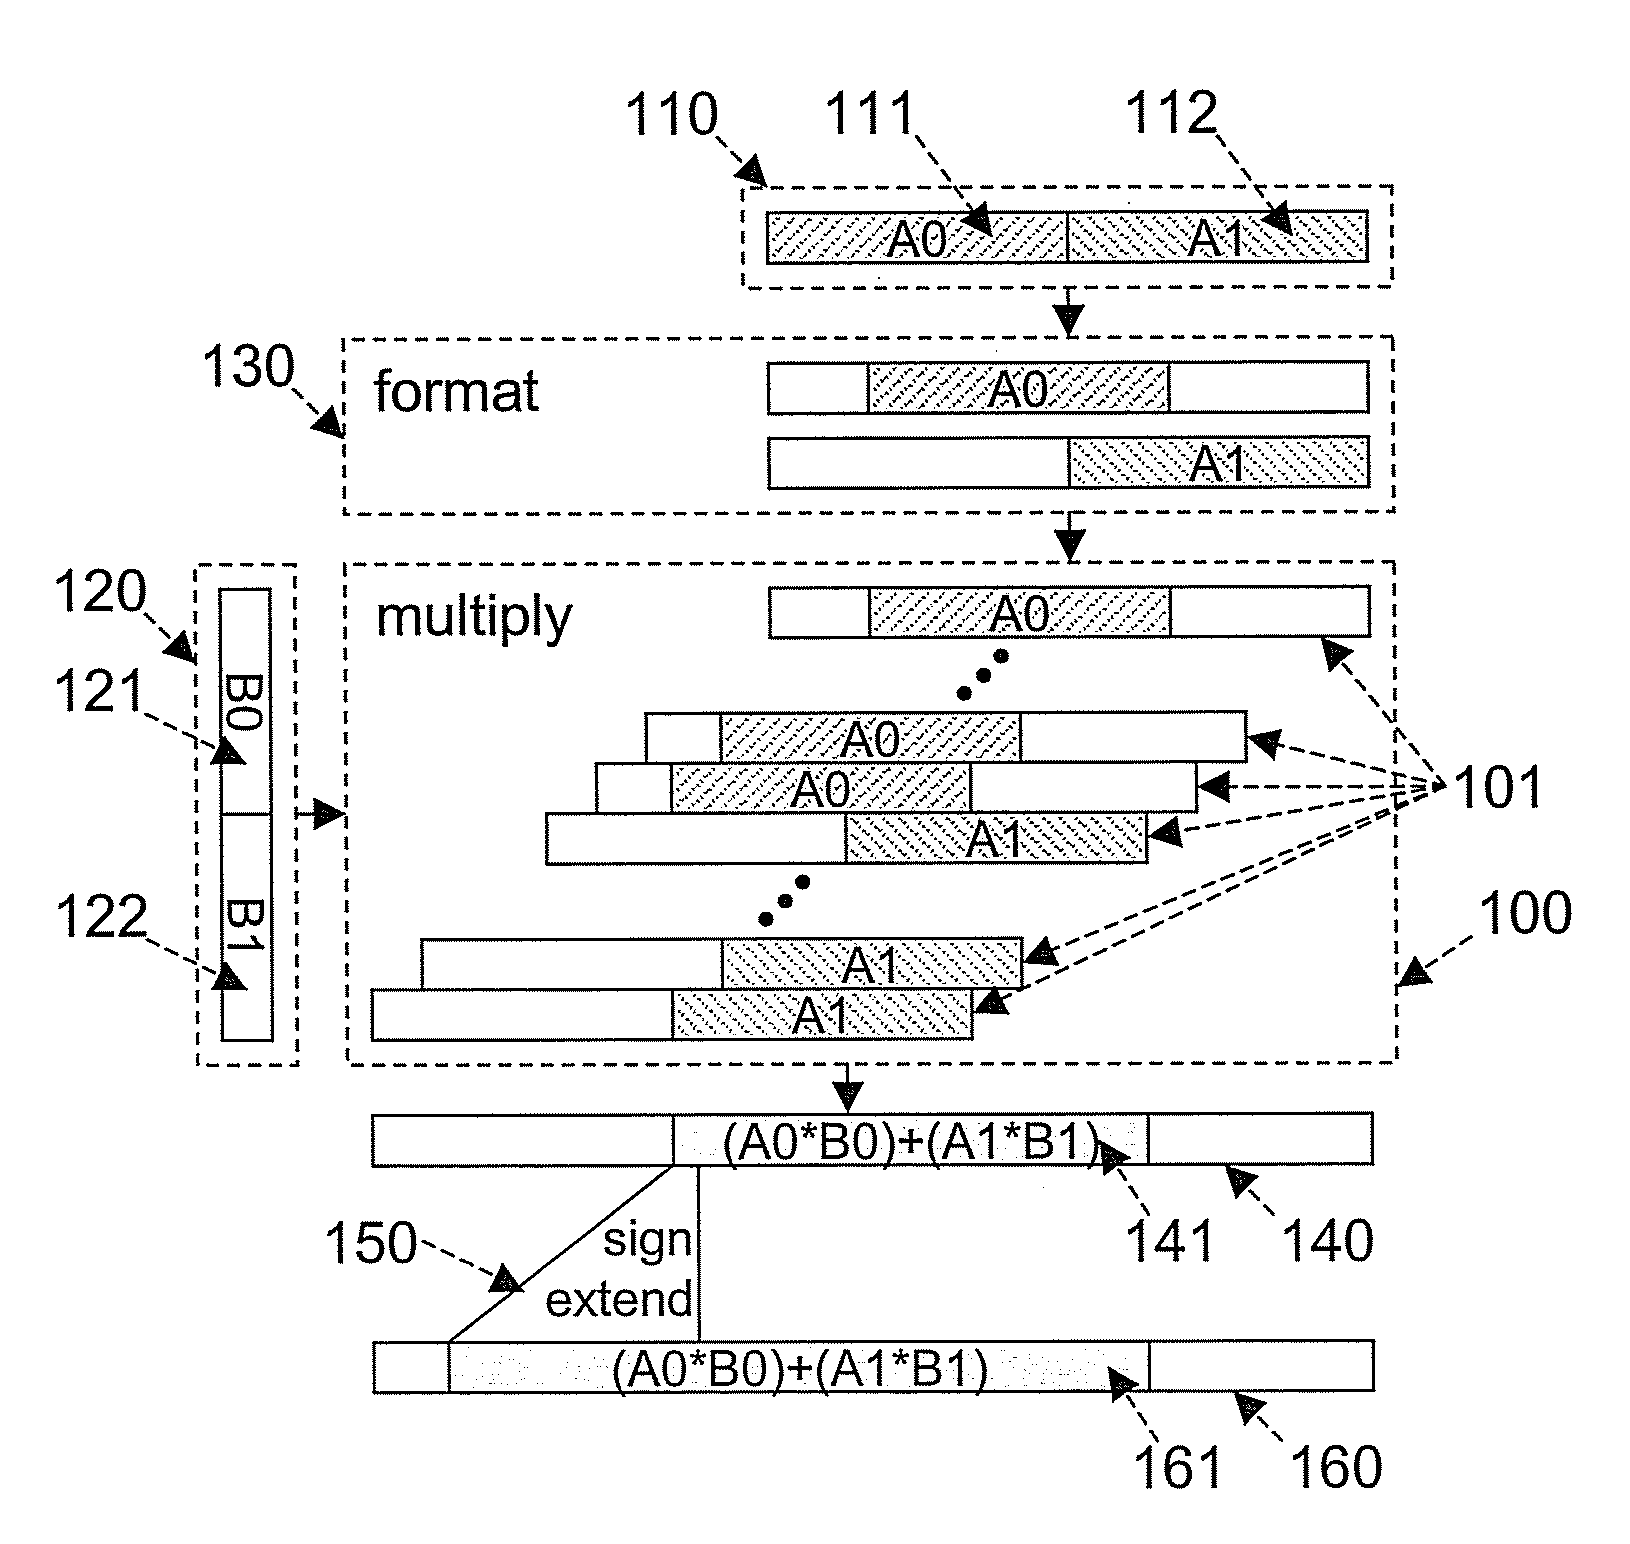 Method for sign-extension in a multi-precision multiplier